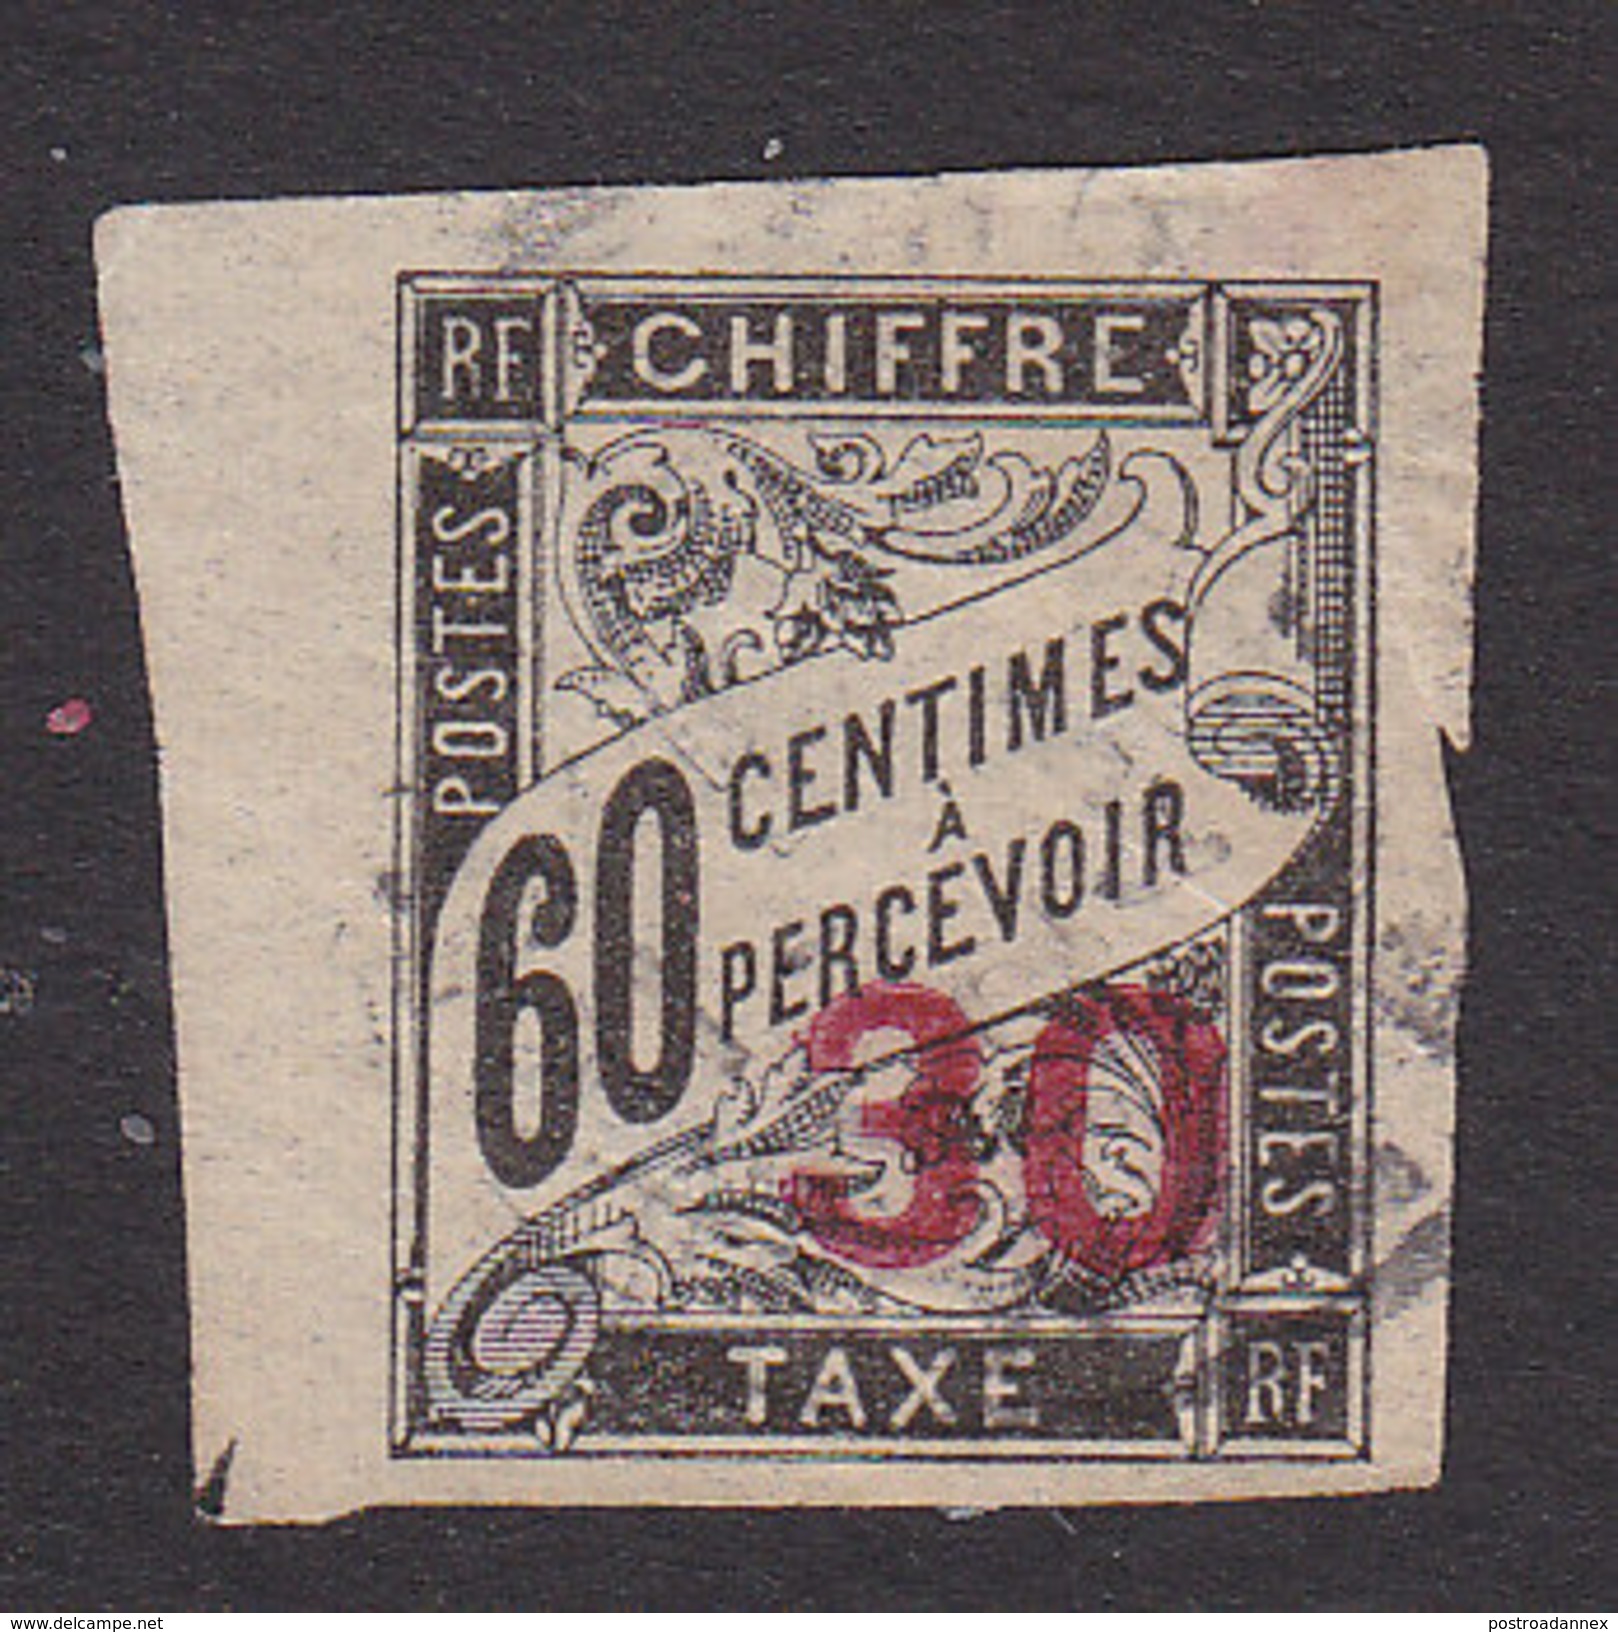 Indo-China, Scott #J4, Used, French Colonies Stamp Surcharged, Issued 1905 - Postage Due